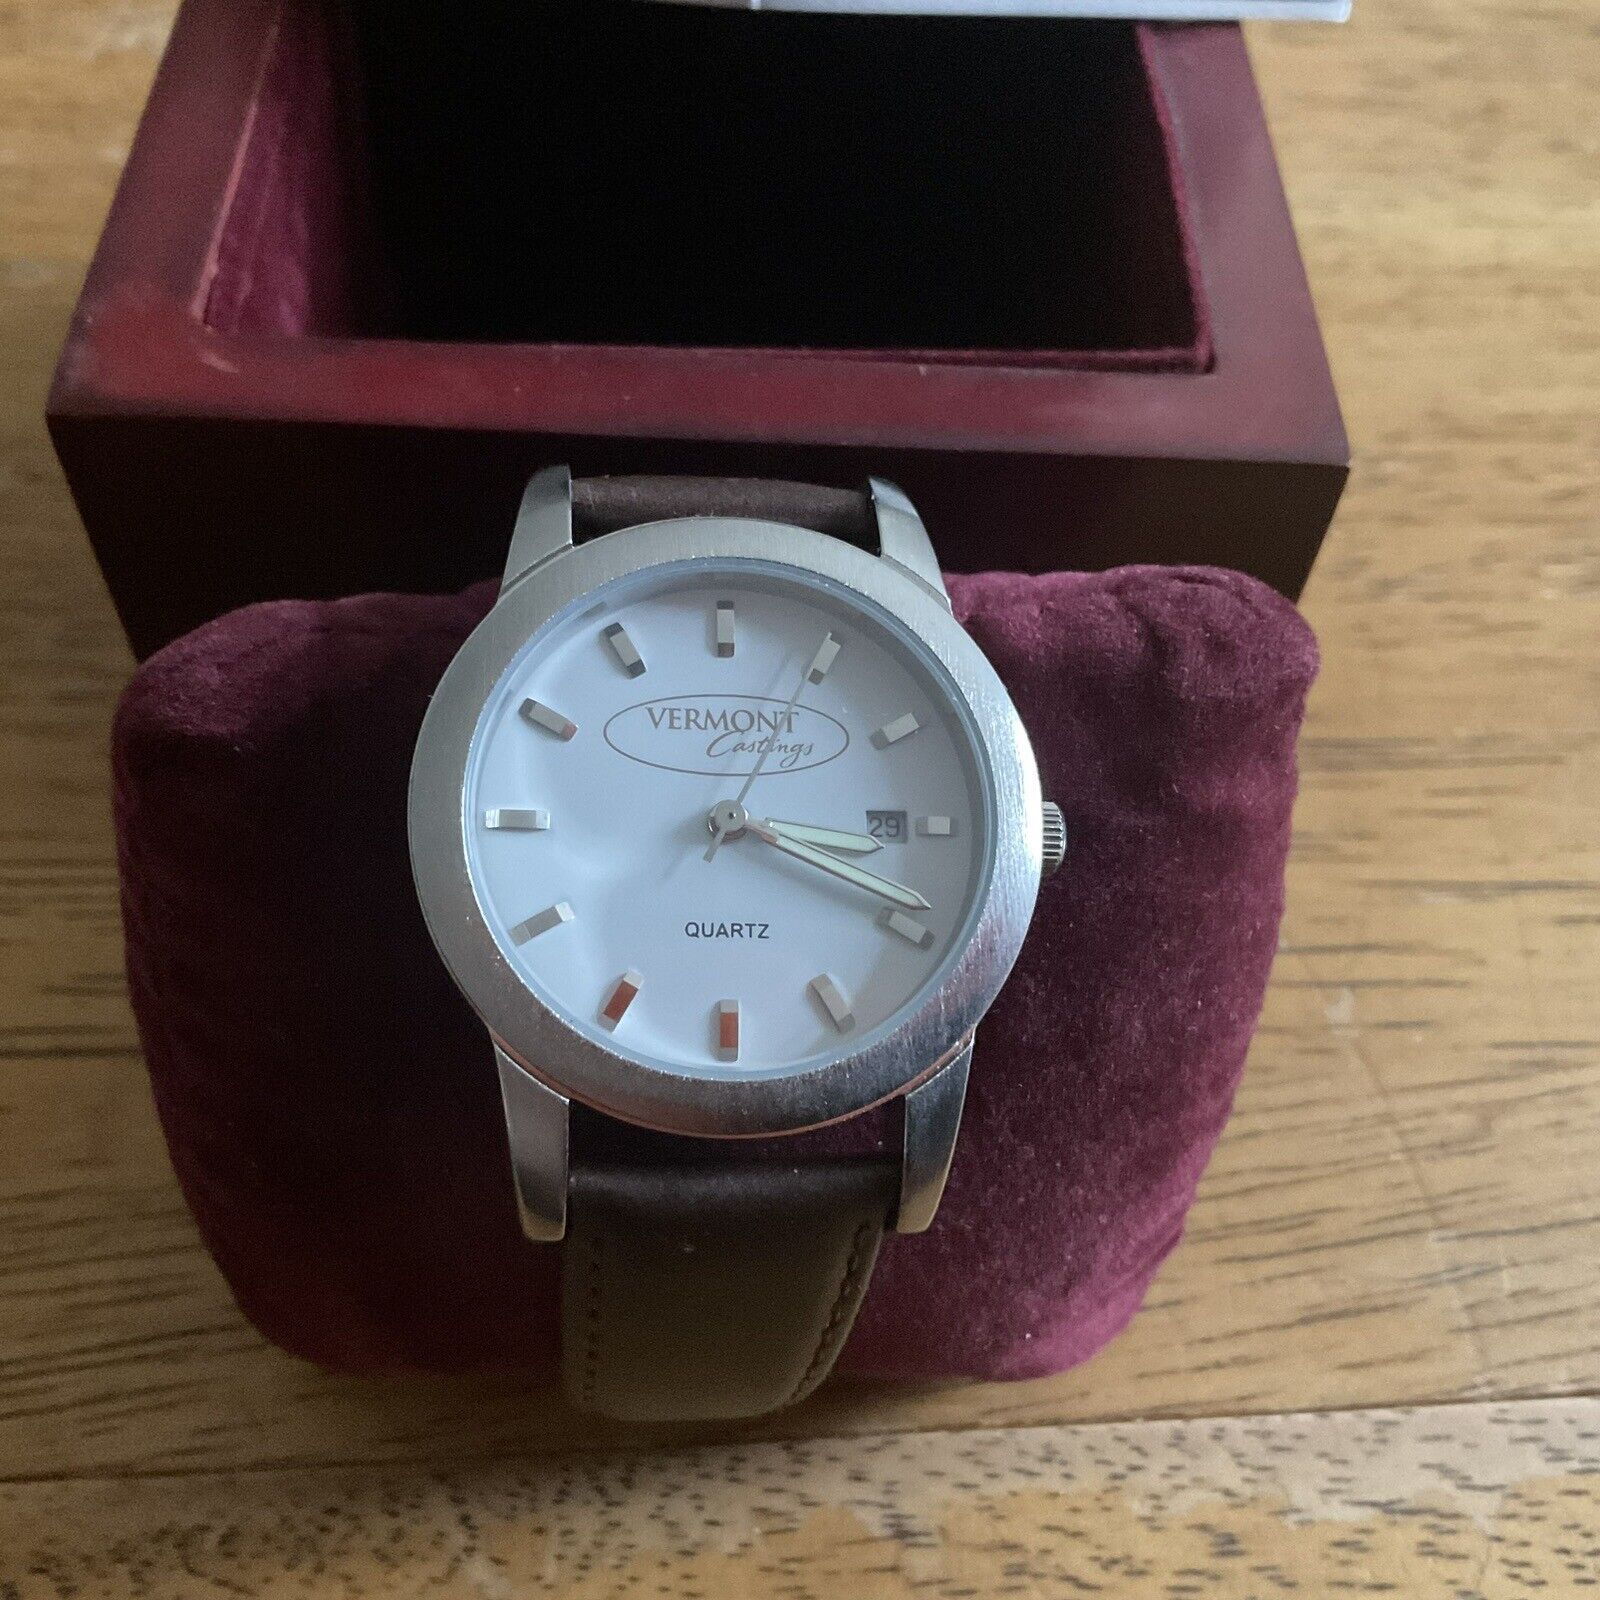 Vermont Castings Watch Very Beautiful and Classic ( Never Used)